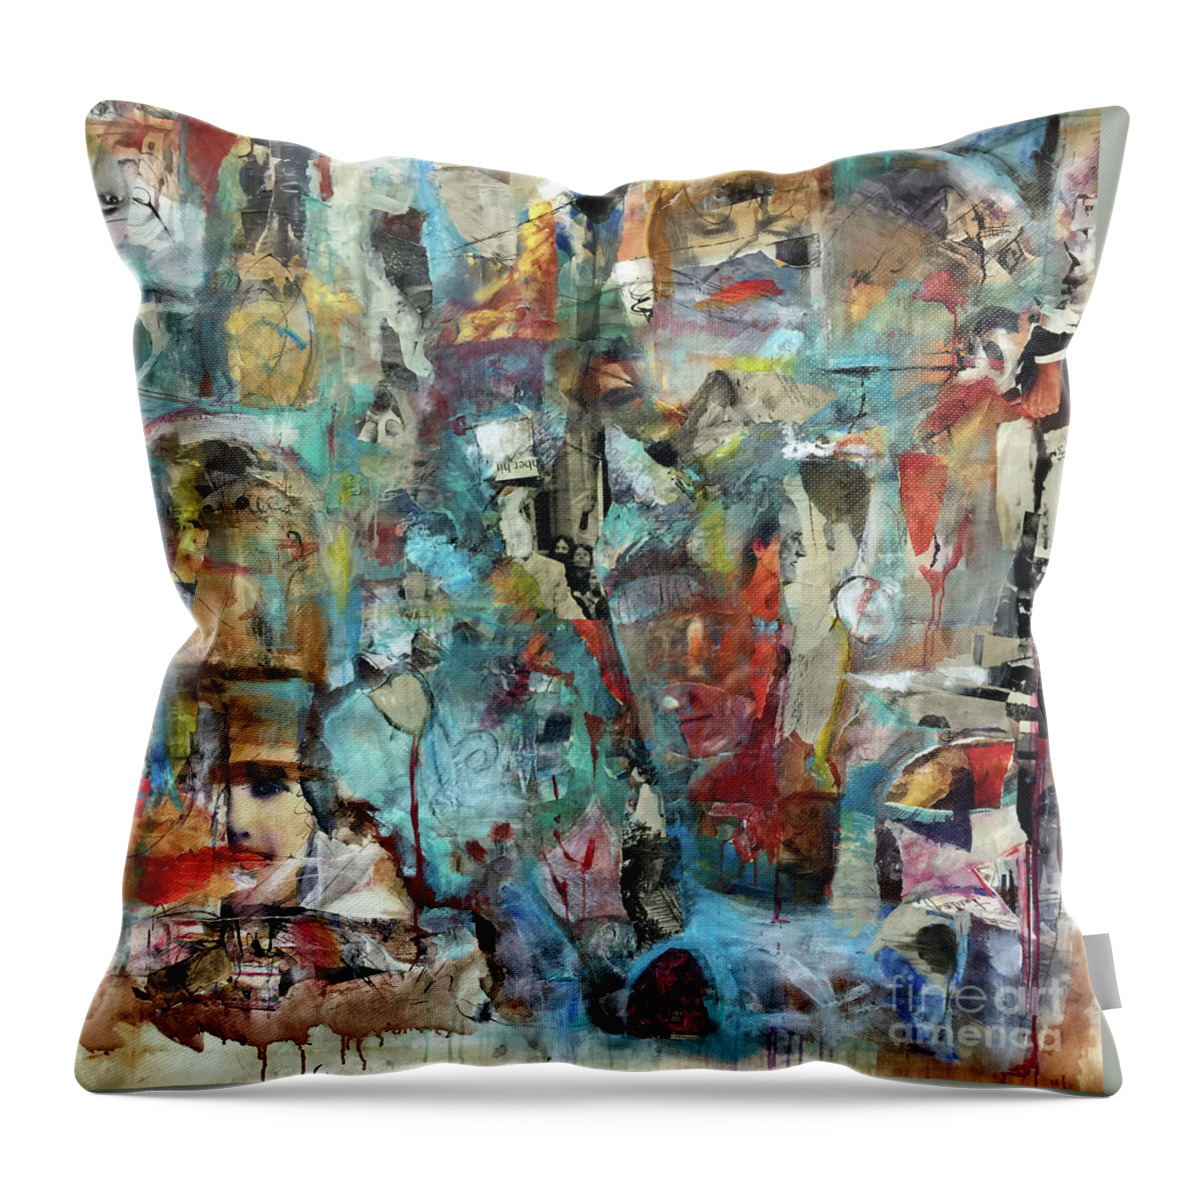  Throw Pillow featuring the mixed media Transformation by Val Zee McCune